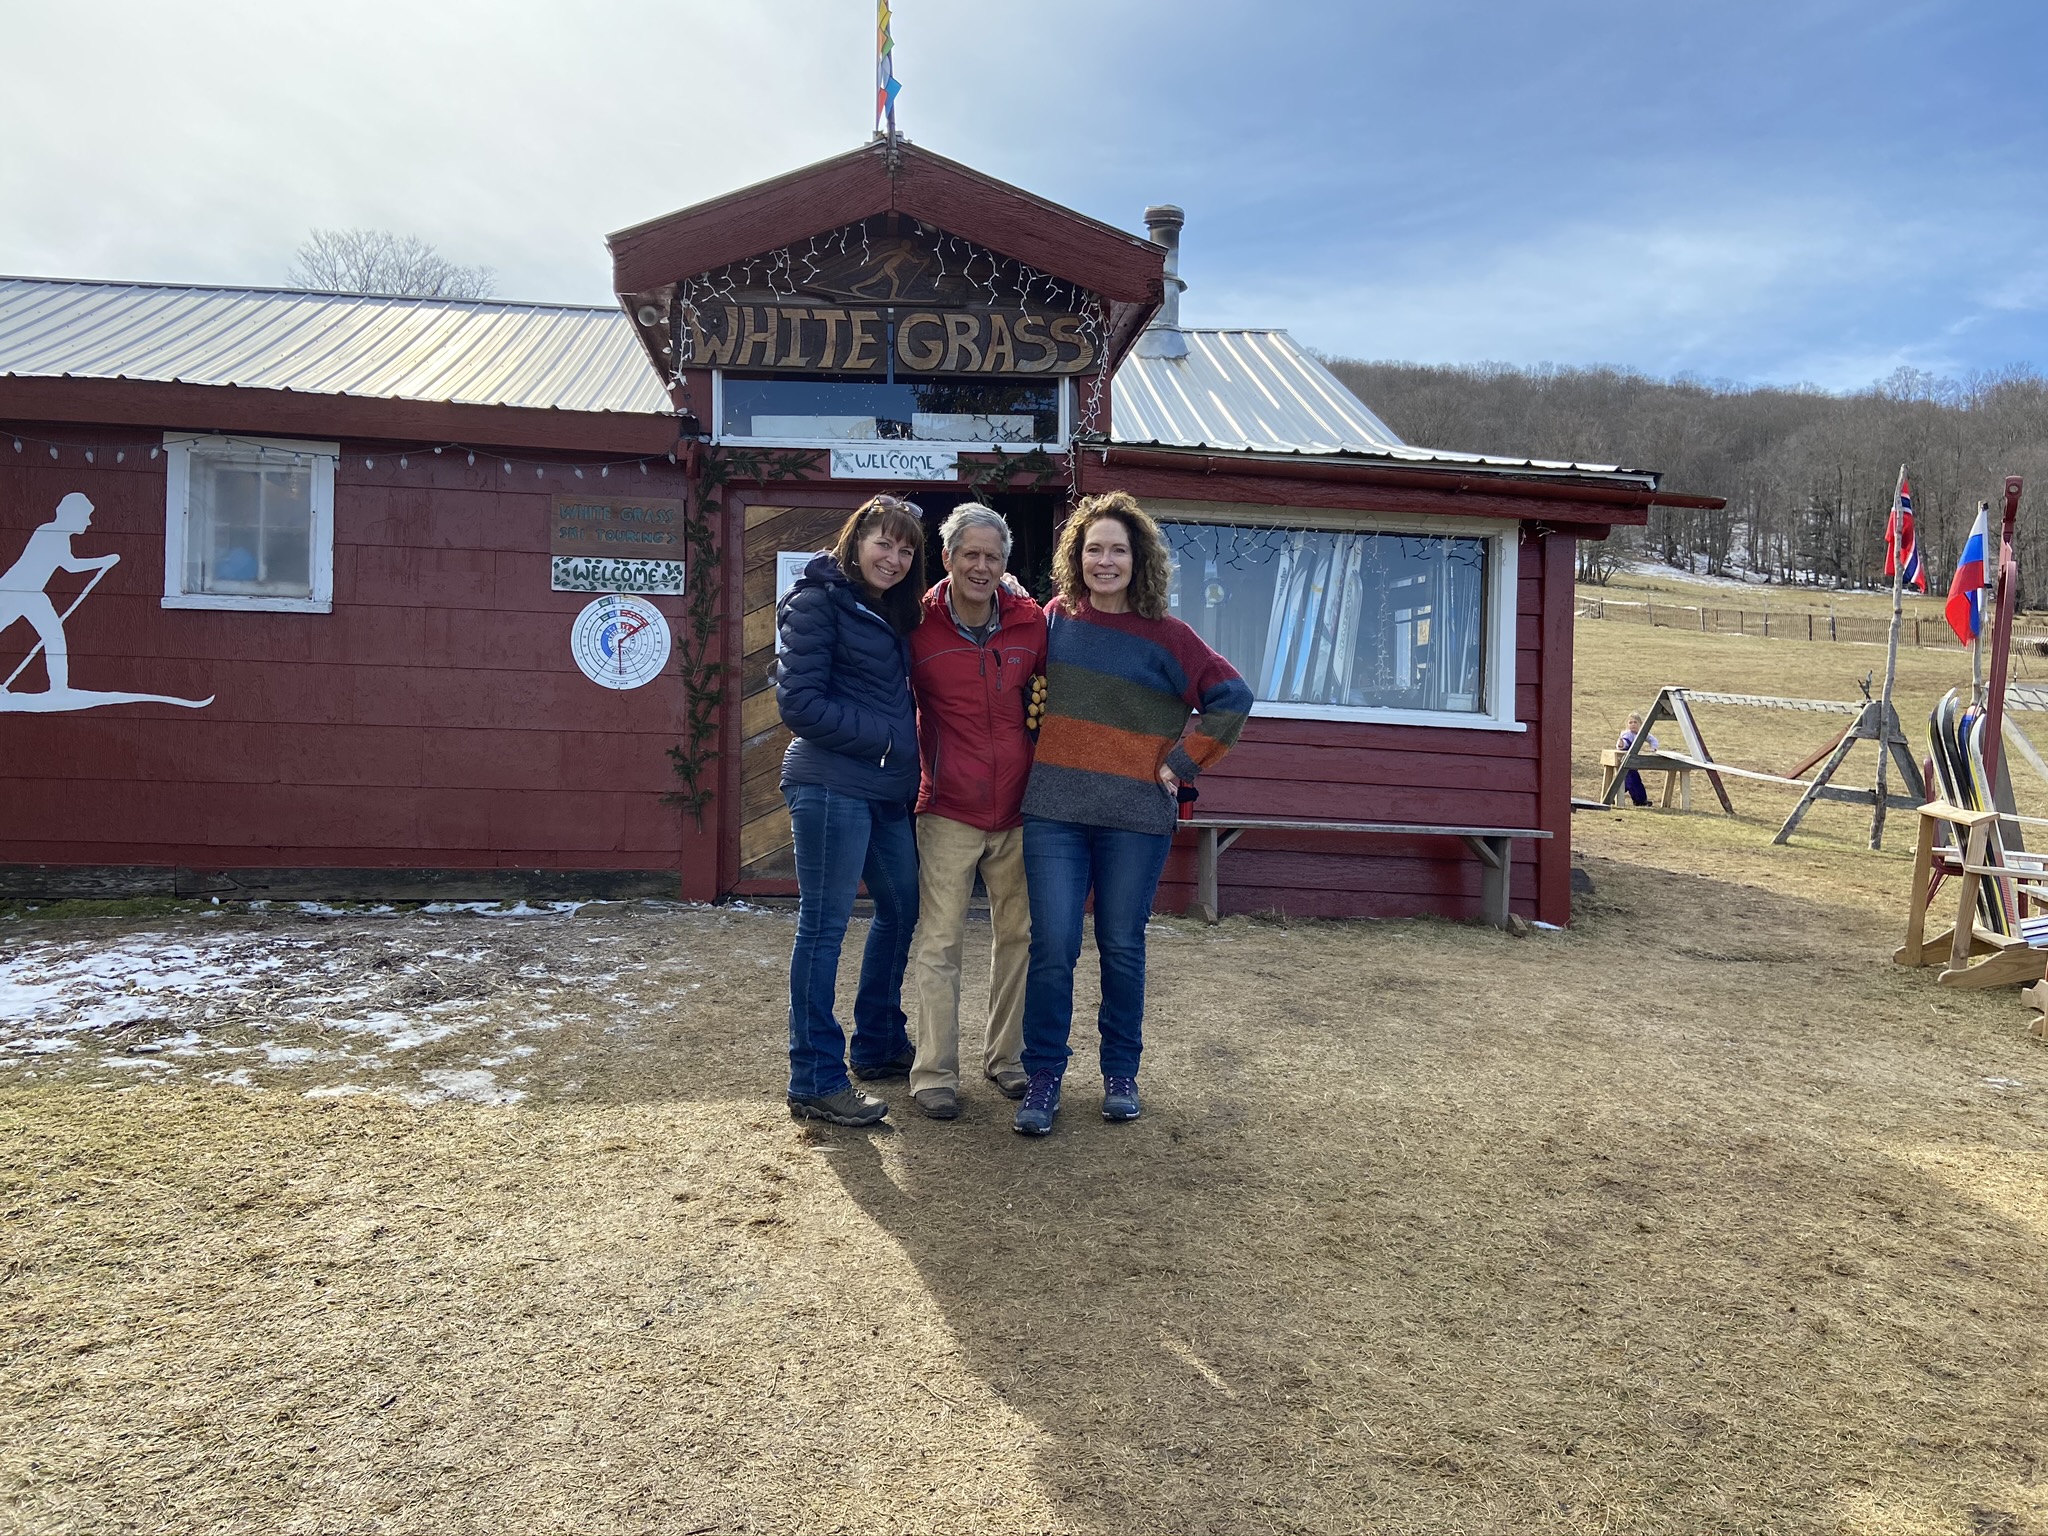 Kim, Chip,and Judy at White Grass